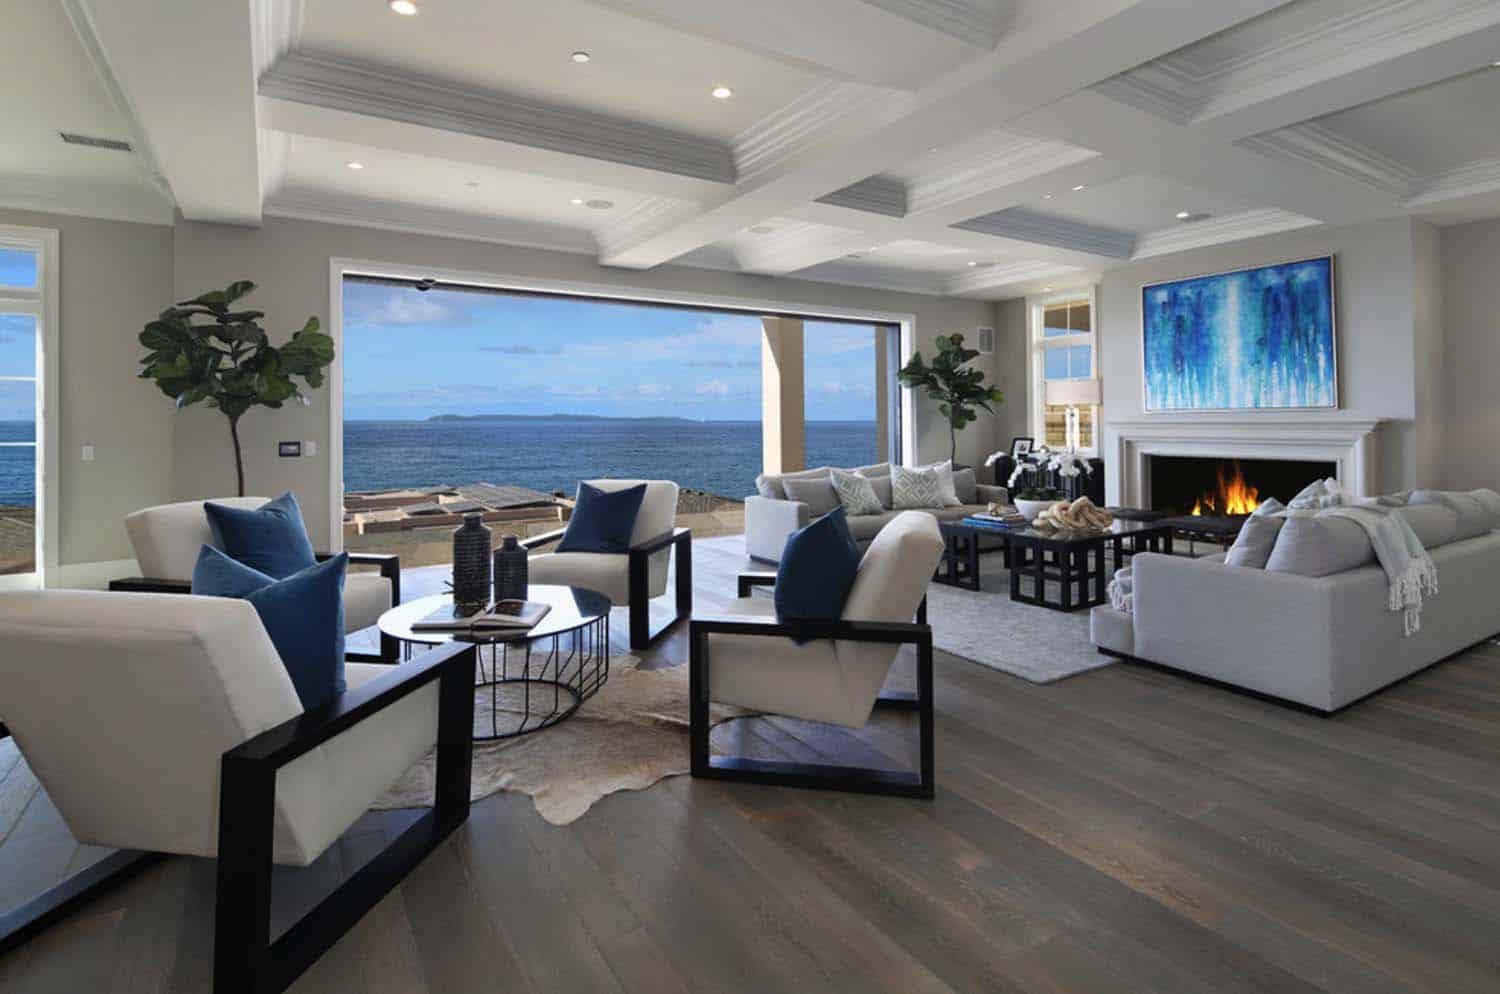 Southern California beach house with a fresh take on casual decor